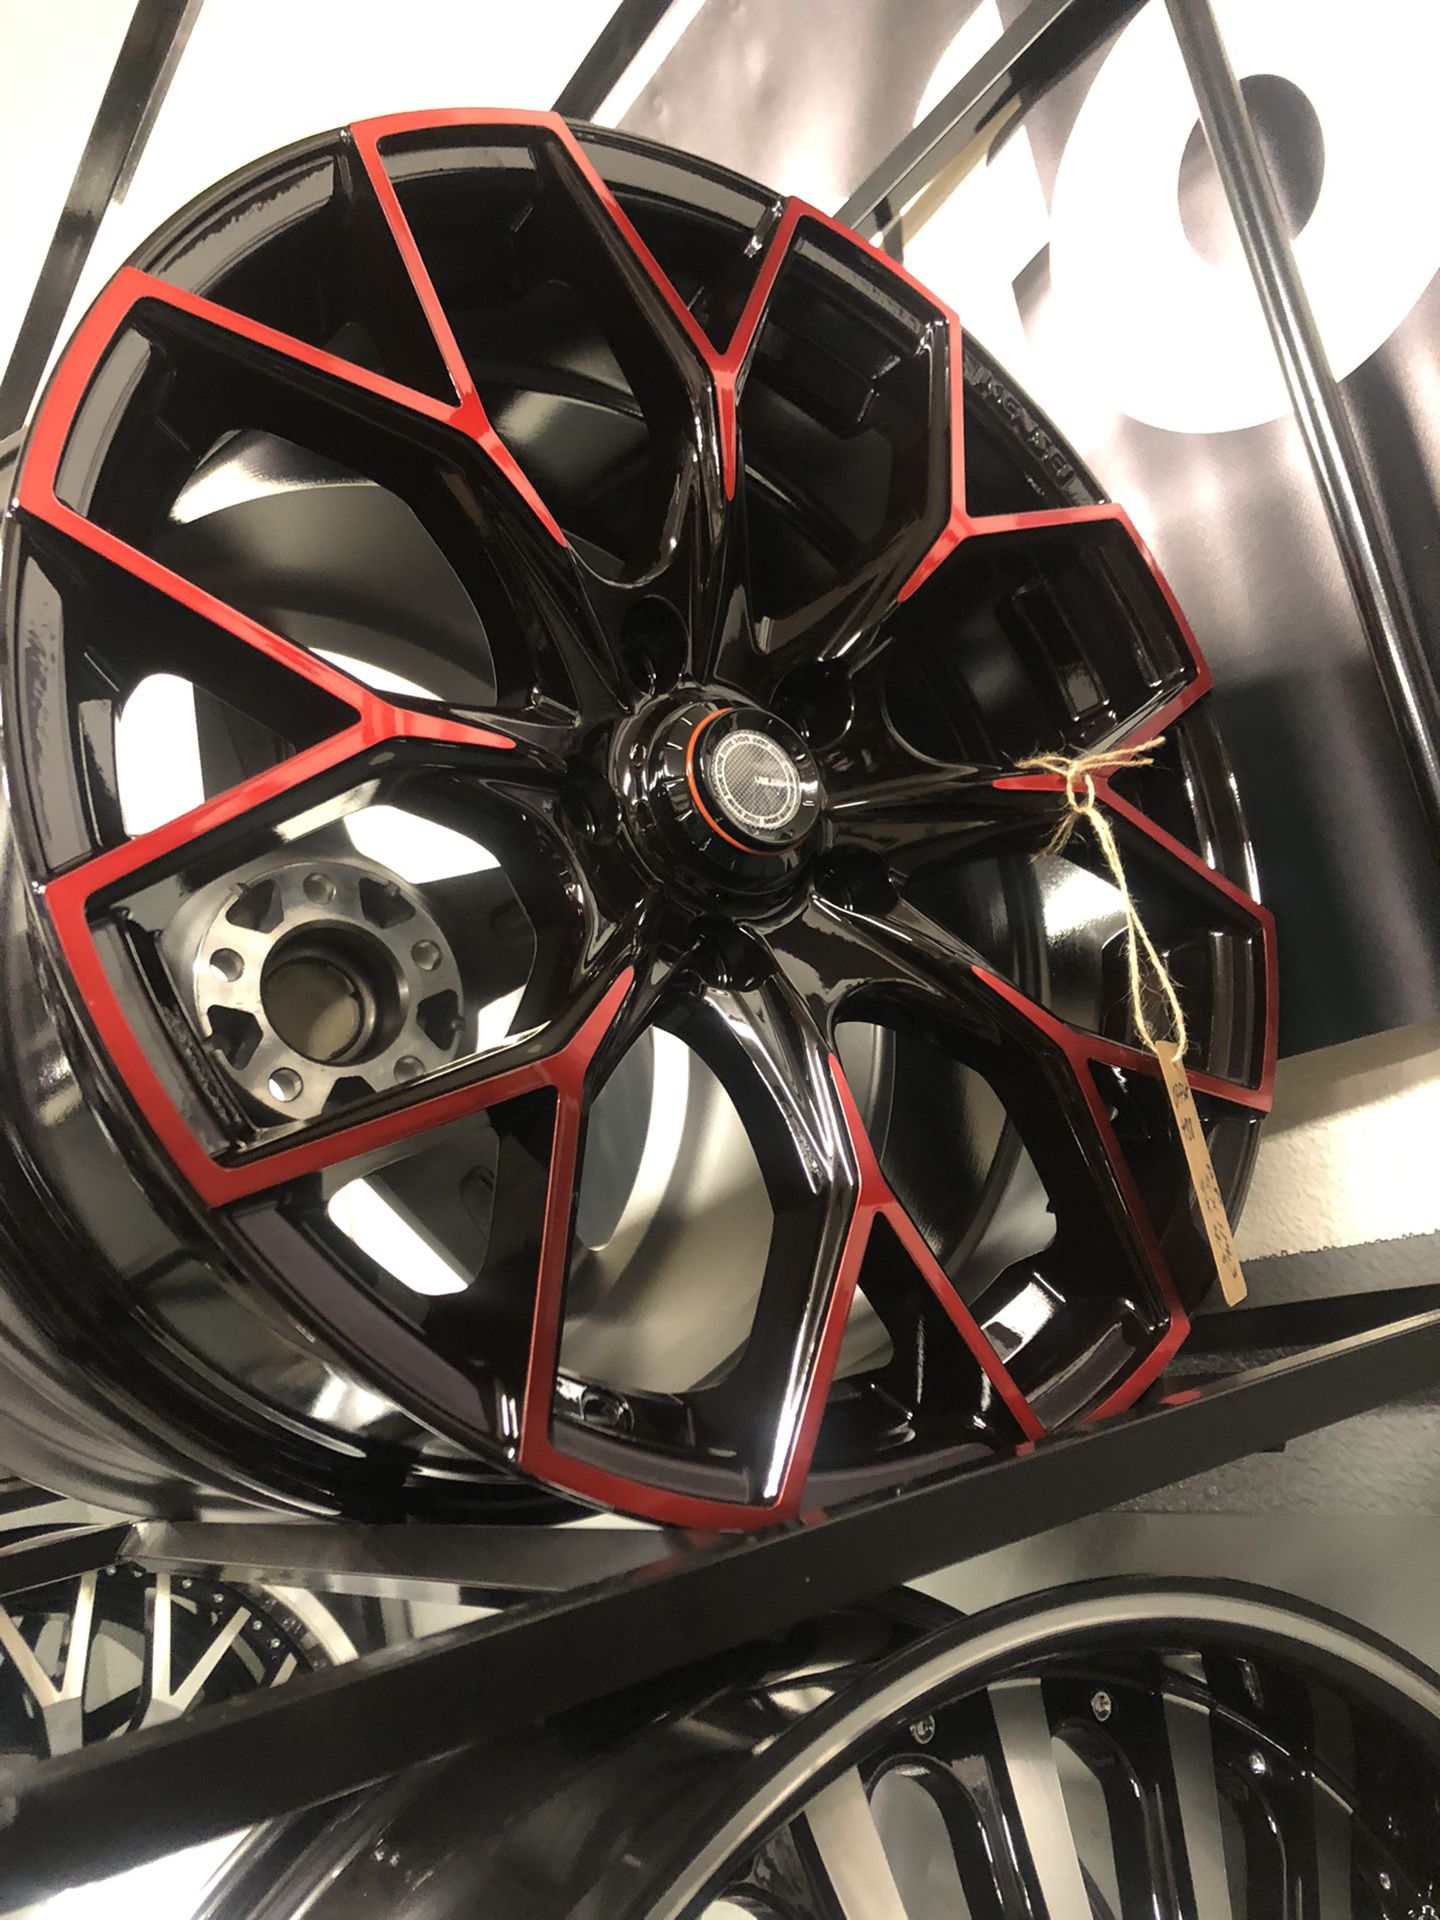 BRAND NEW set (4) Red and Black rims only $500 !!!